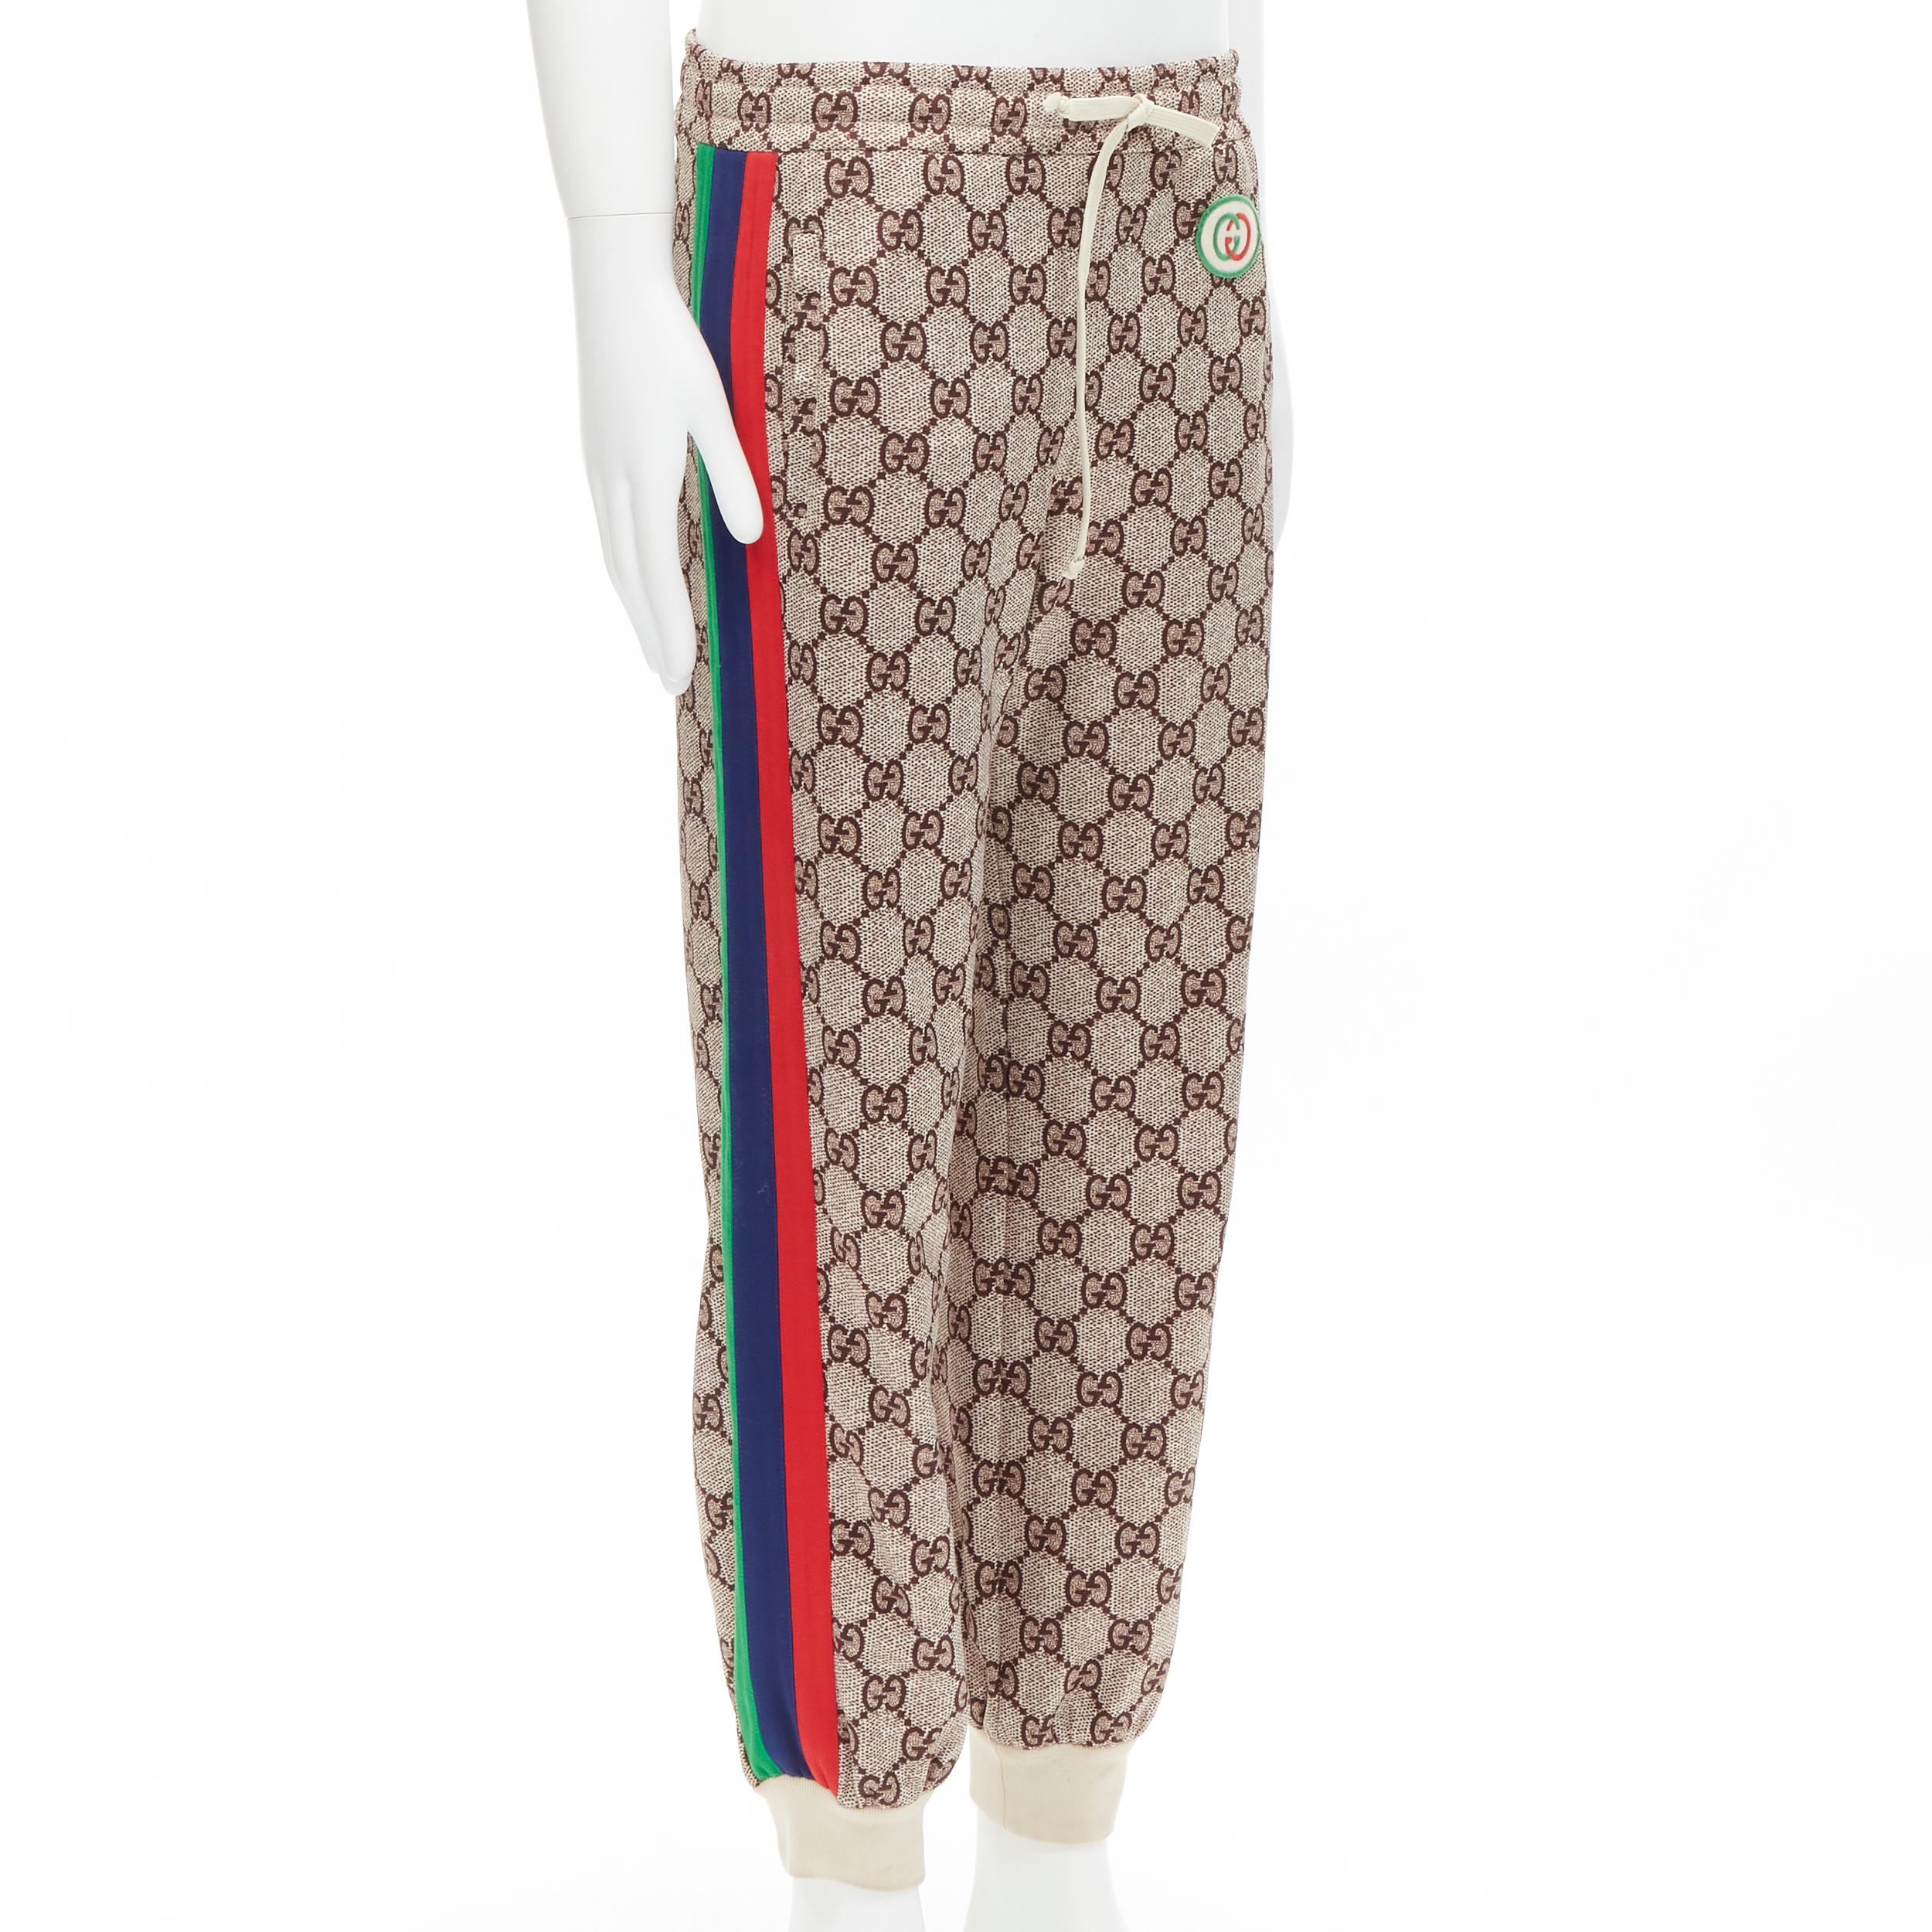 GUCCI Retro Rainbow GG Supreme vintage monogram web track sweat pants S
Brand: Gucci
Collection: Retro Rainbow 
Extra Detail: GG logo patch at front waist. Web trim along side. Drawstring waist.

CONDITION:
Condition: Excellent, this item was